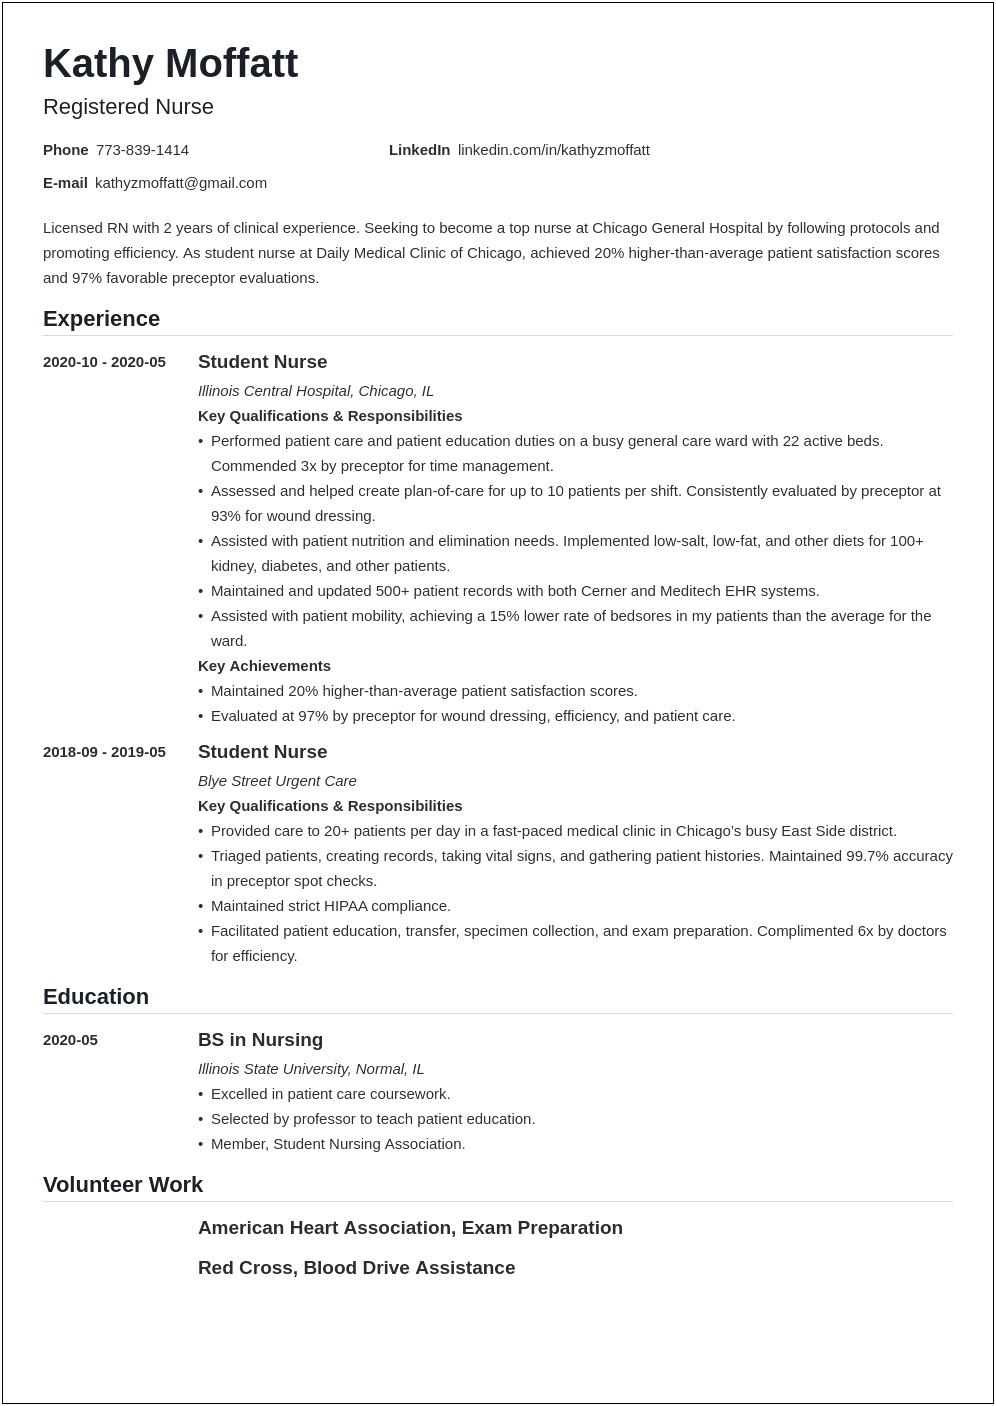 Excellent Resume Sample For Nurses With Experience